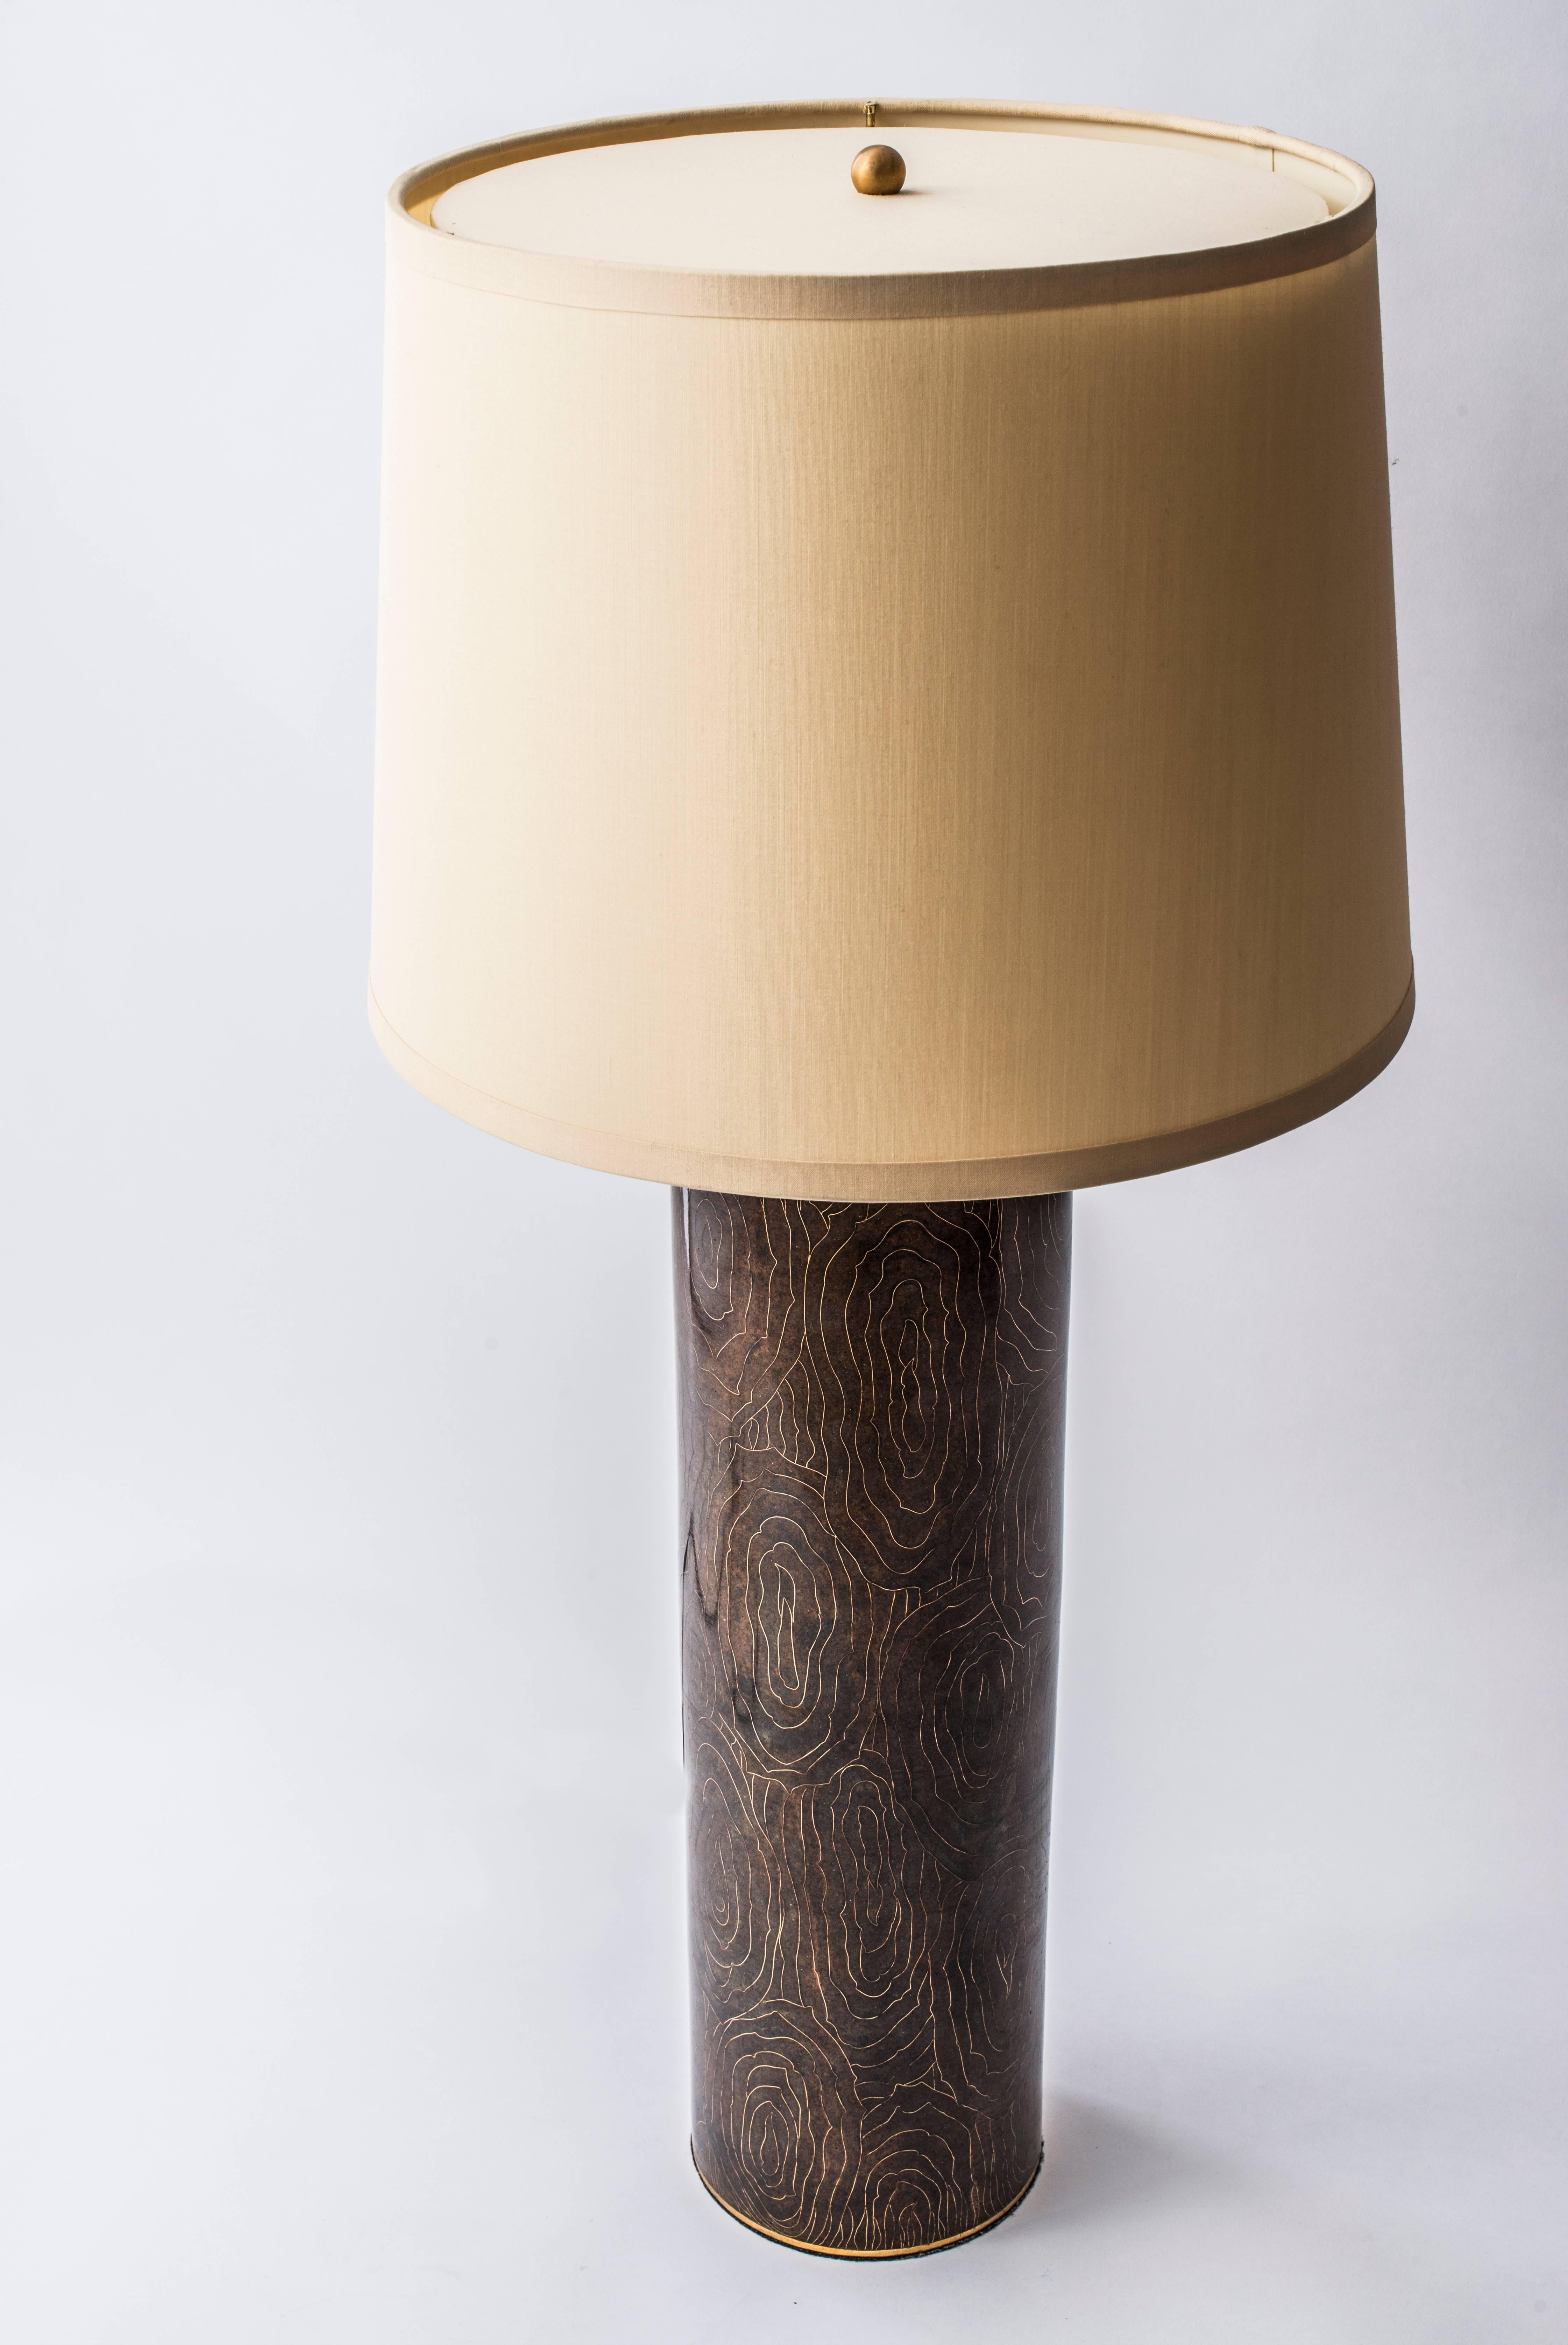 Other Robert Kuo for McGuire Buche Amber Wood Grain Table Lamp, Cloisonne For Sale